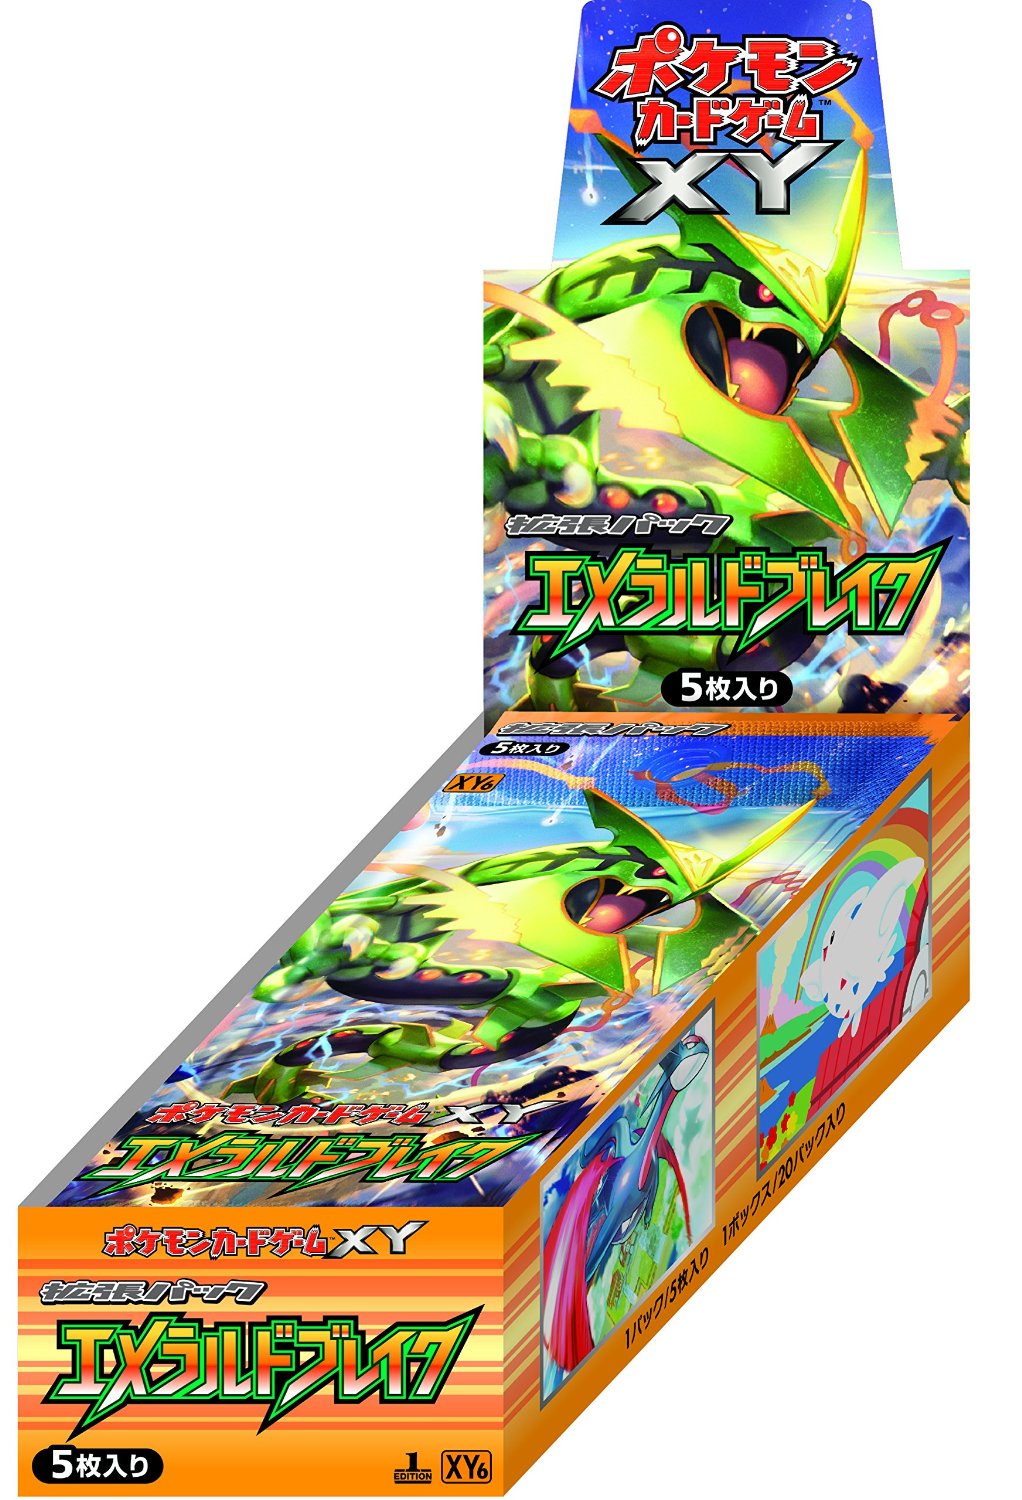 FIRST EDITION XY6 Emerald Break (Japanese) Booster Box x1